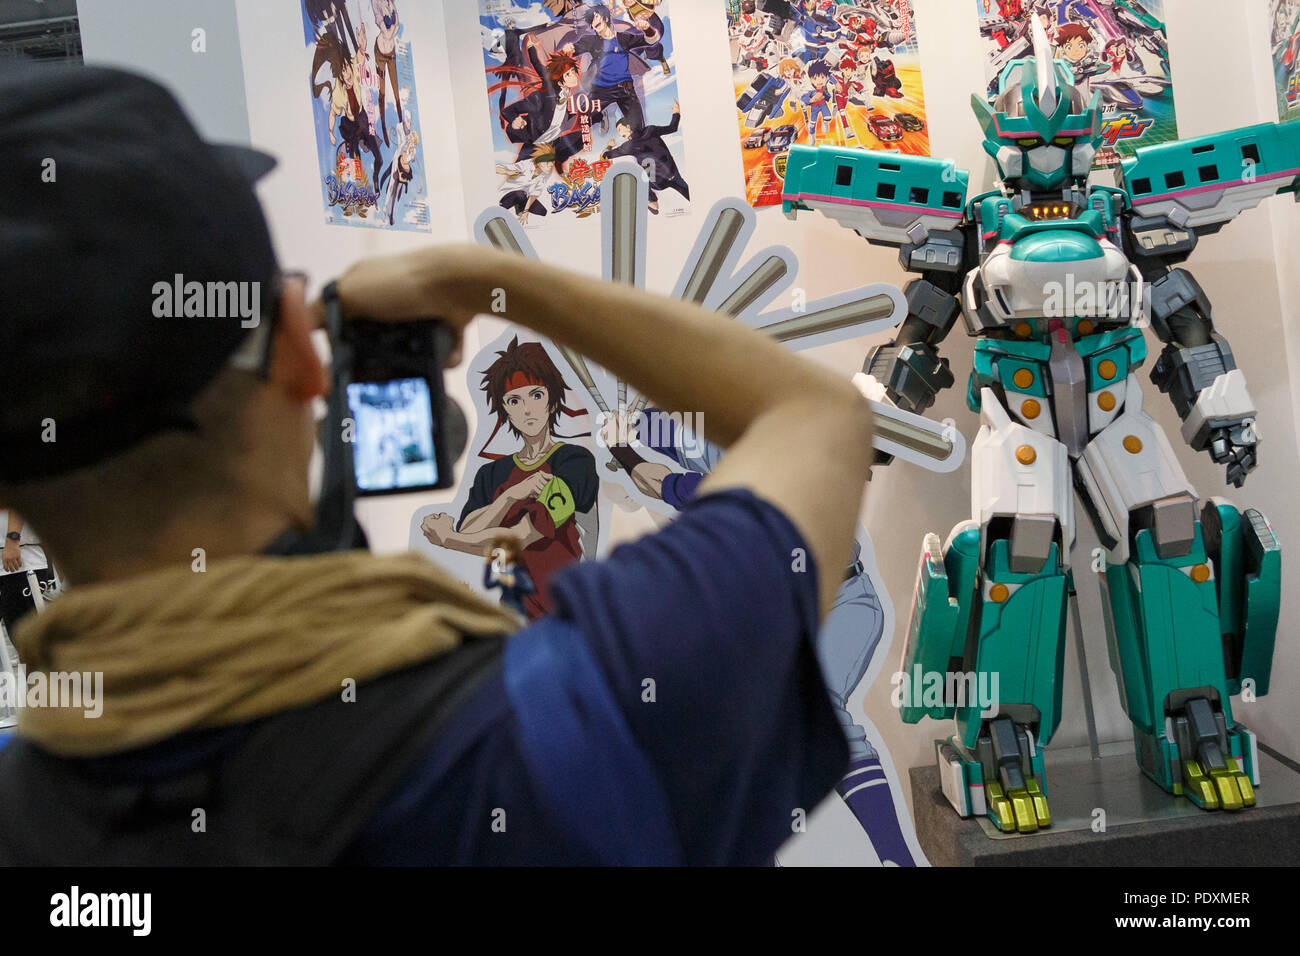 Tokyo, Japan, 11 Aug 2018. A man takes a picture of a bullet train robot during the Comic Market 94 (Comiket) event at Tokyo Big Sight on August 11, 2018, Tokyo, Japan. The annual event that began in 1975 focuses on manga, anime, game and cosplay. Organizers expect more than 500,000 visitors to attend the 3-day event. Credit: Rodrigo Reyes Marin/AFLO/Alamy Live News Stock Photo